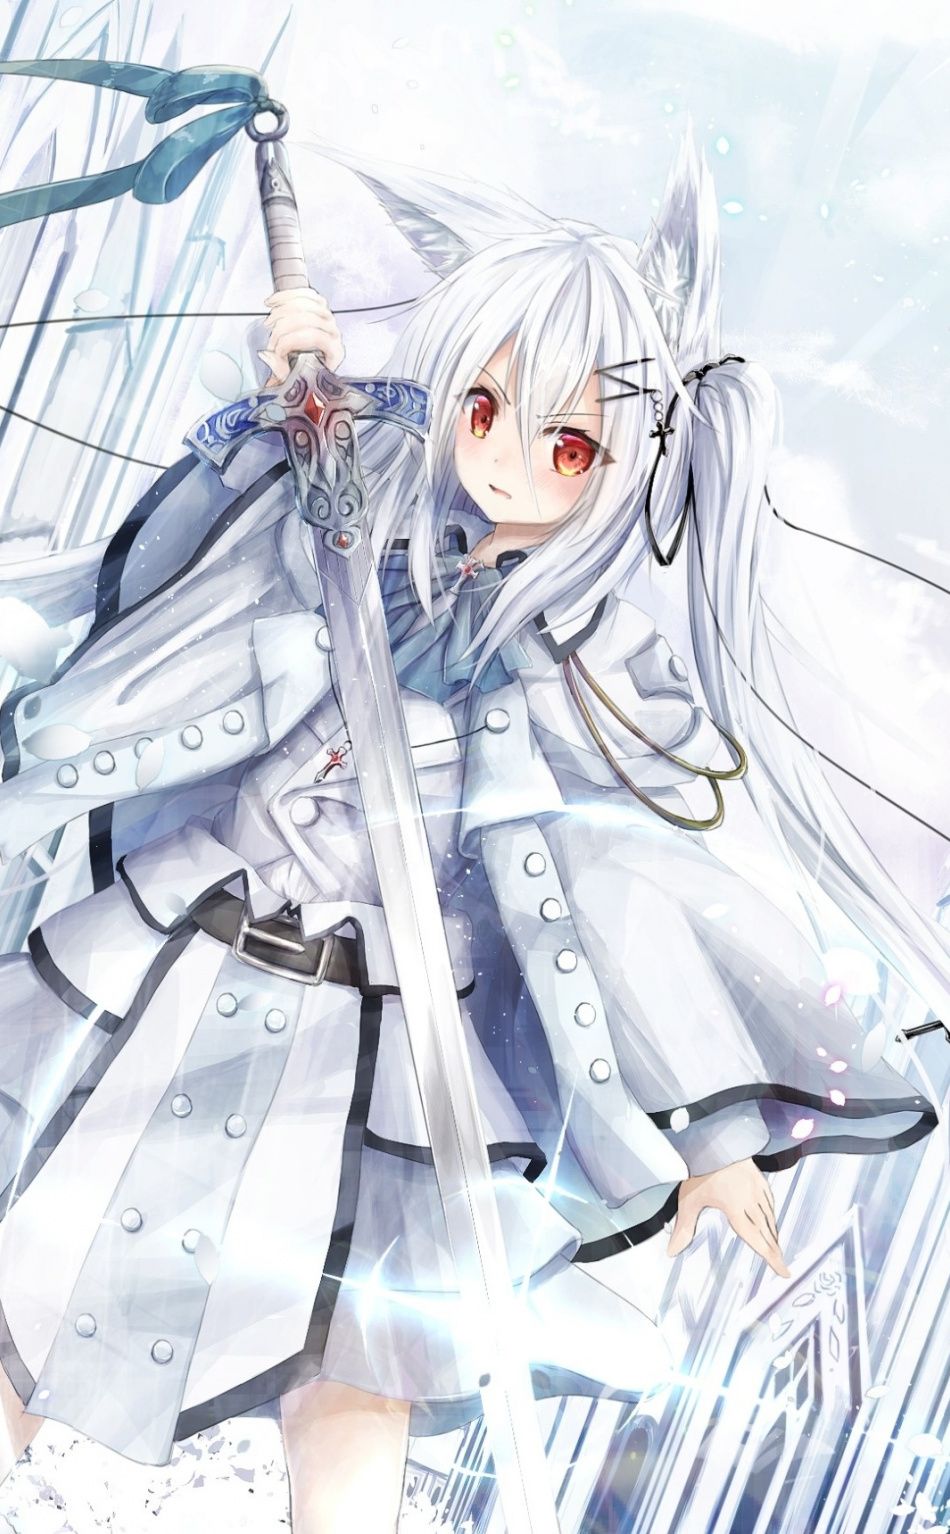 Aggregate 75+ white haired anime girl - awesomeenglish.edu.vn